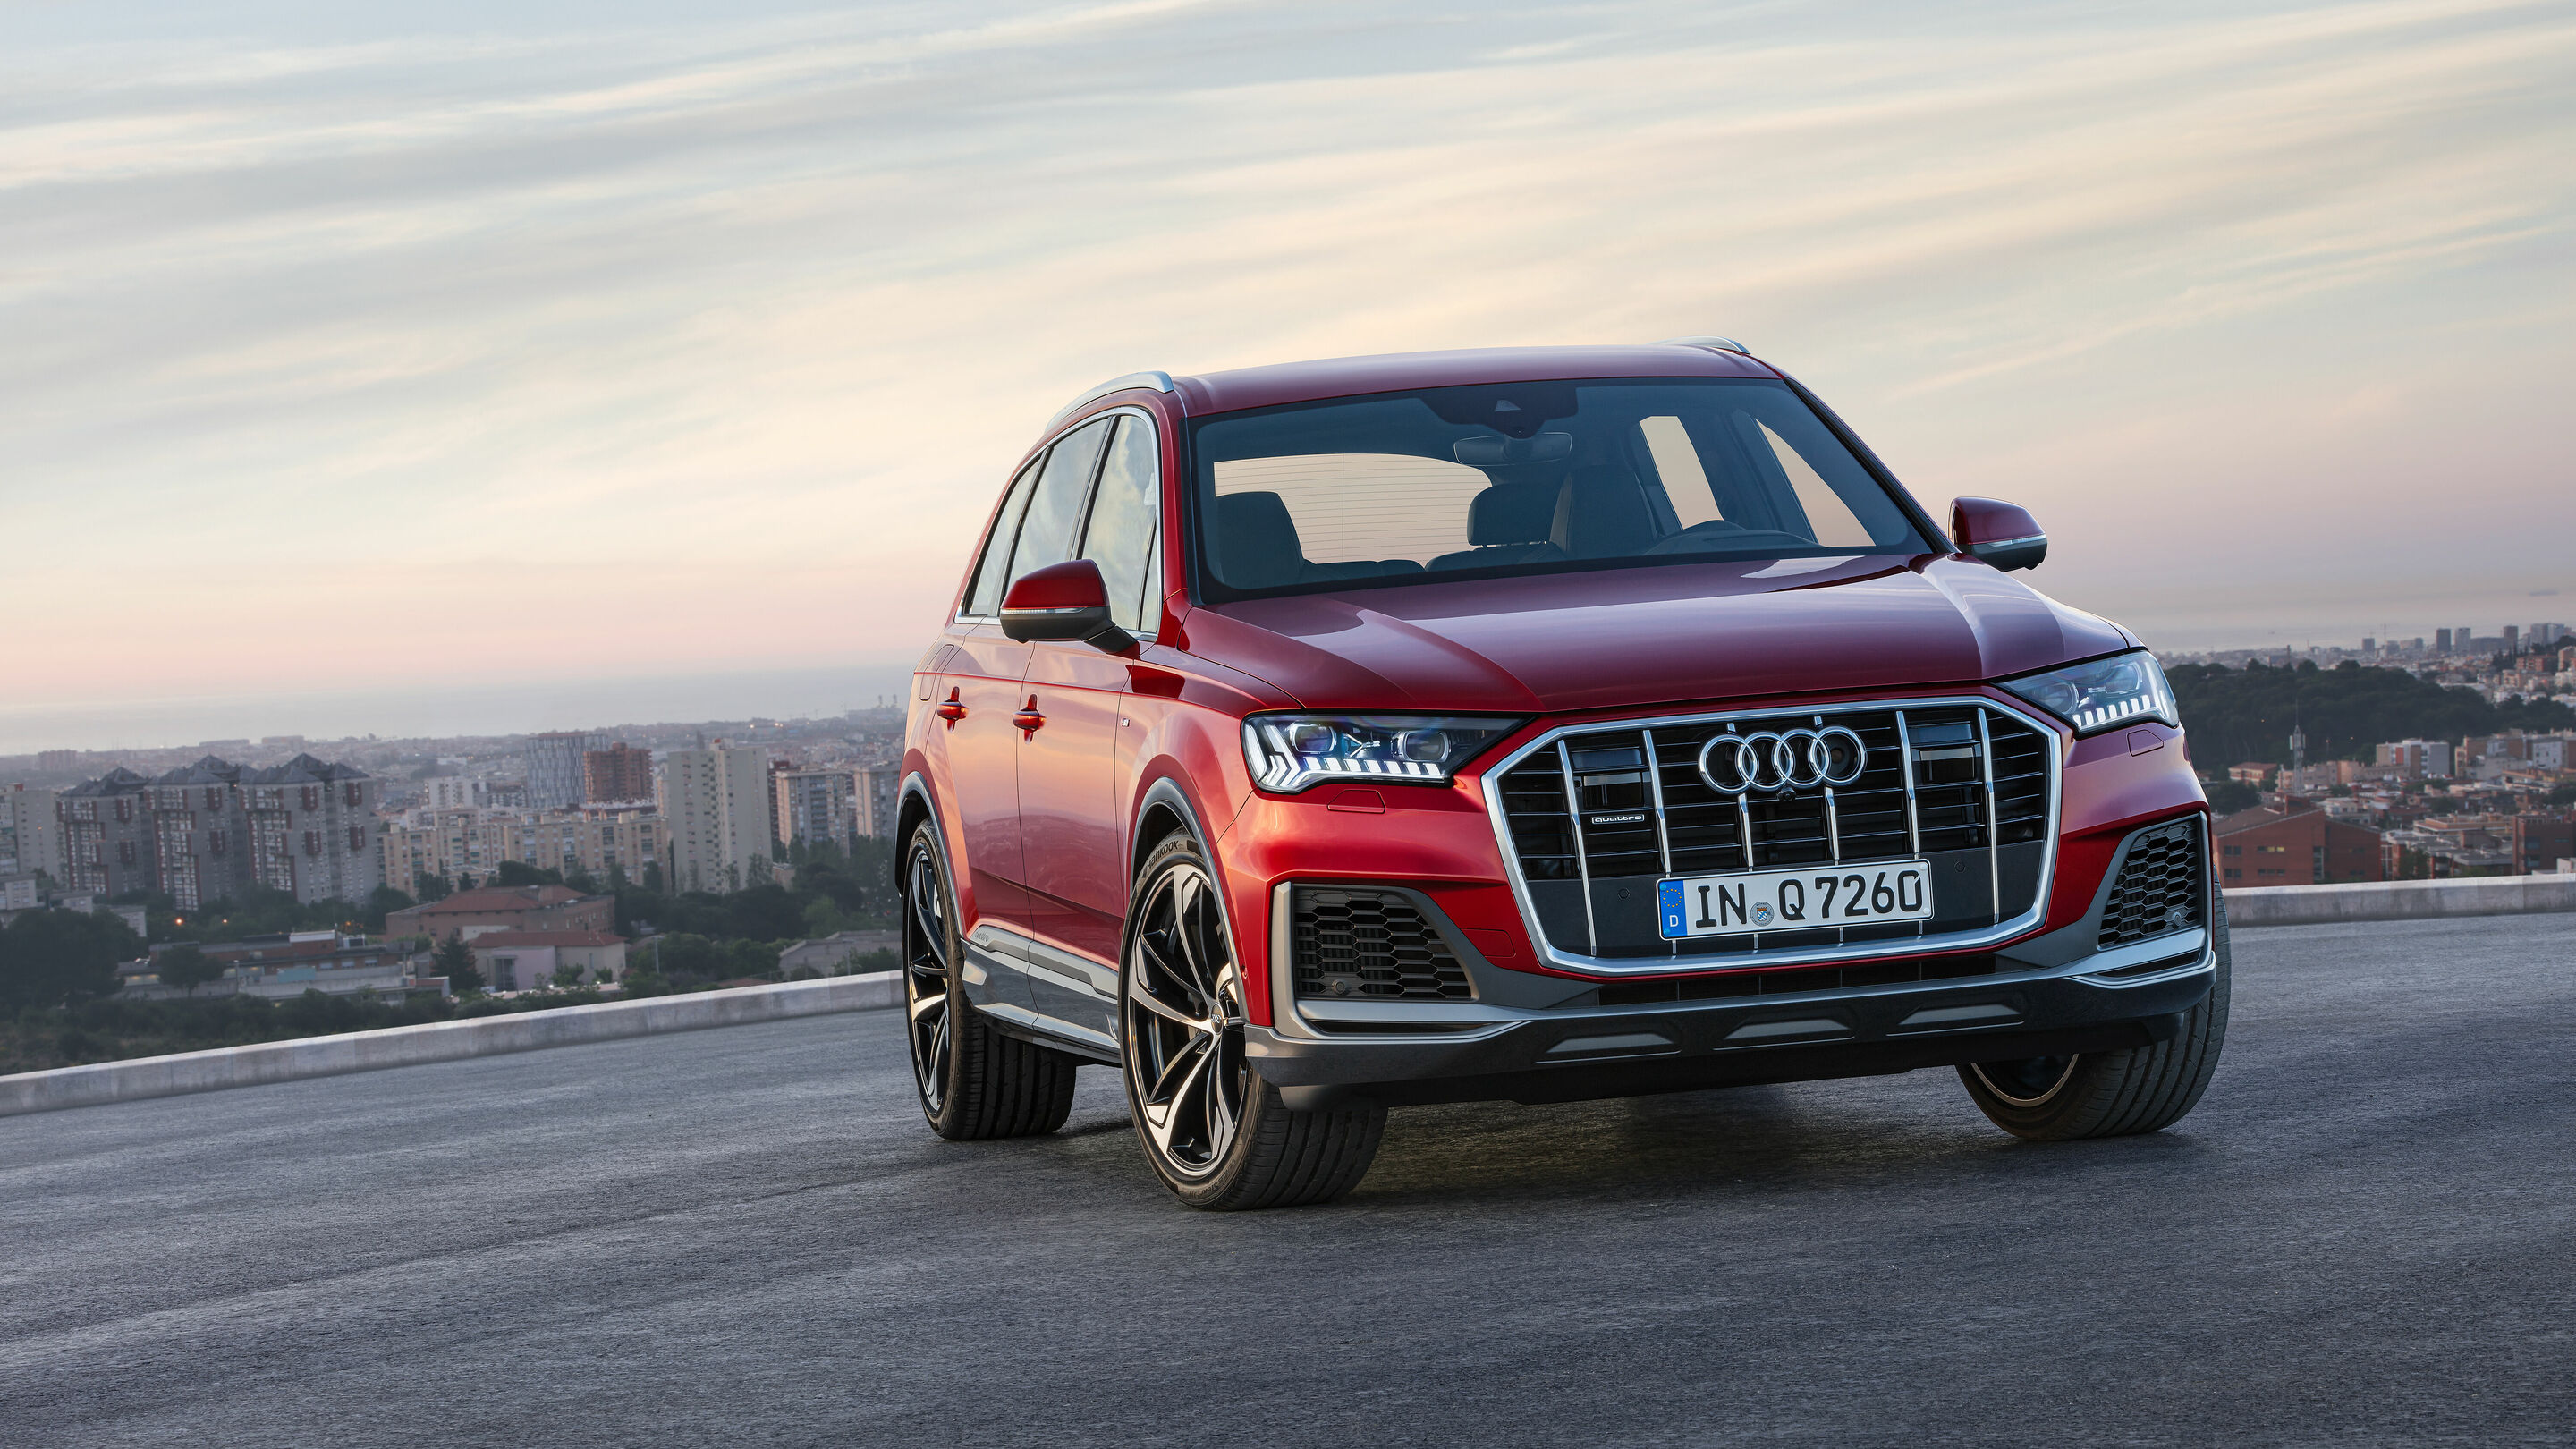 What we're driving: 2020 Audi Q7